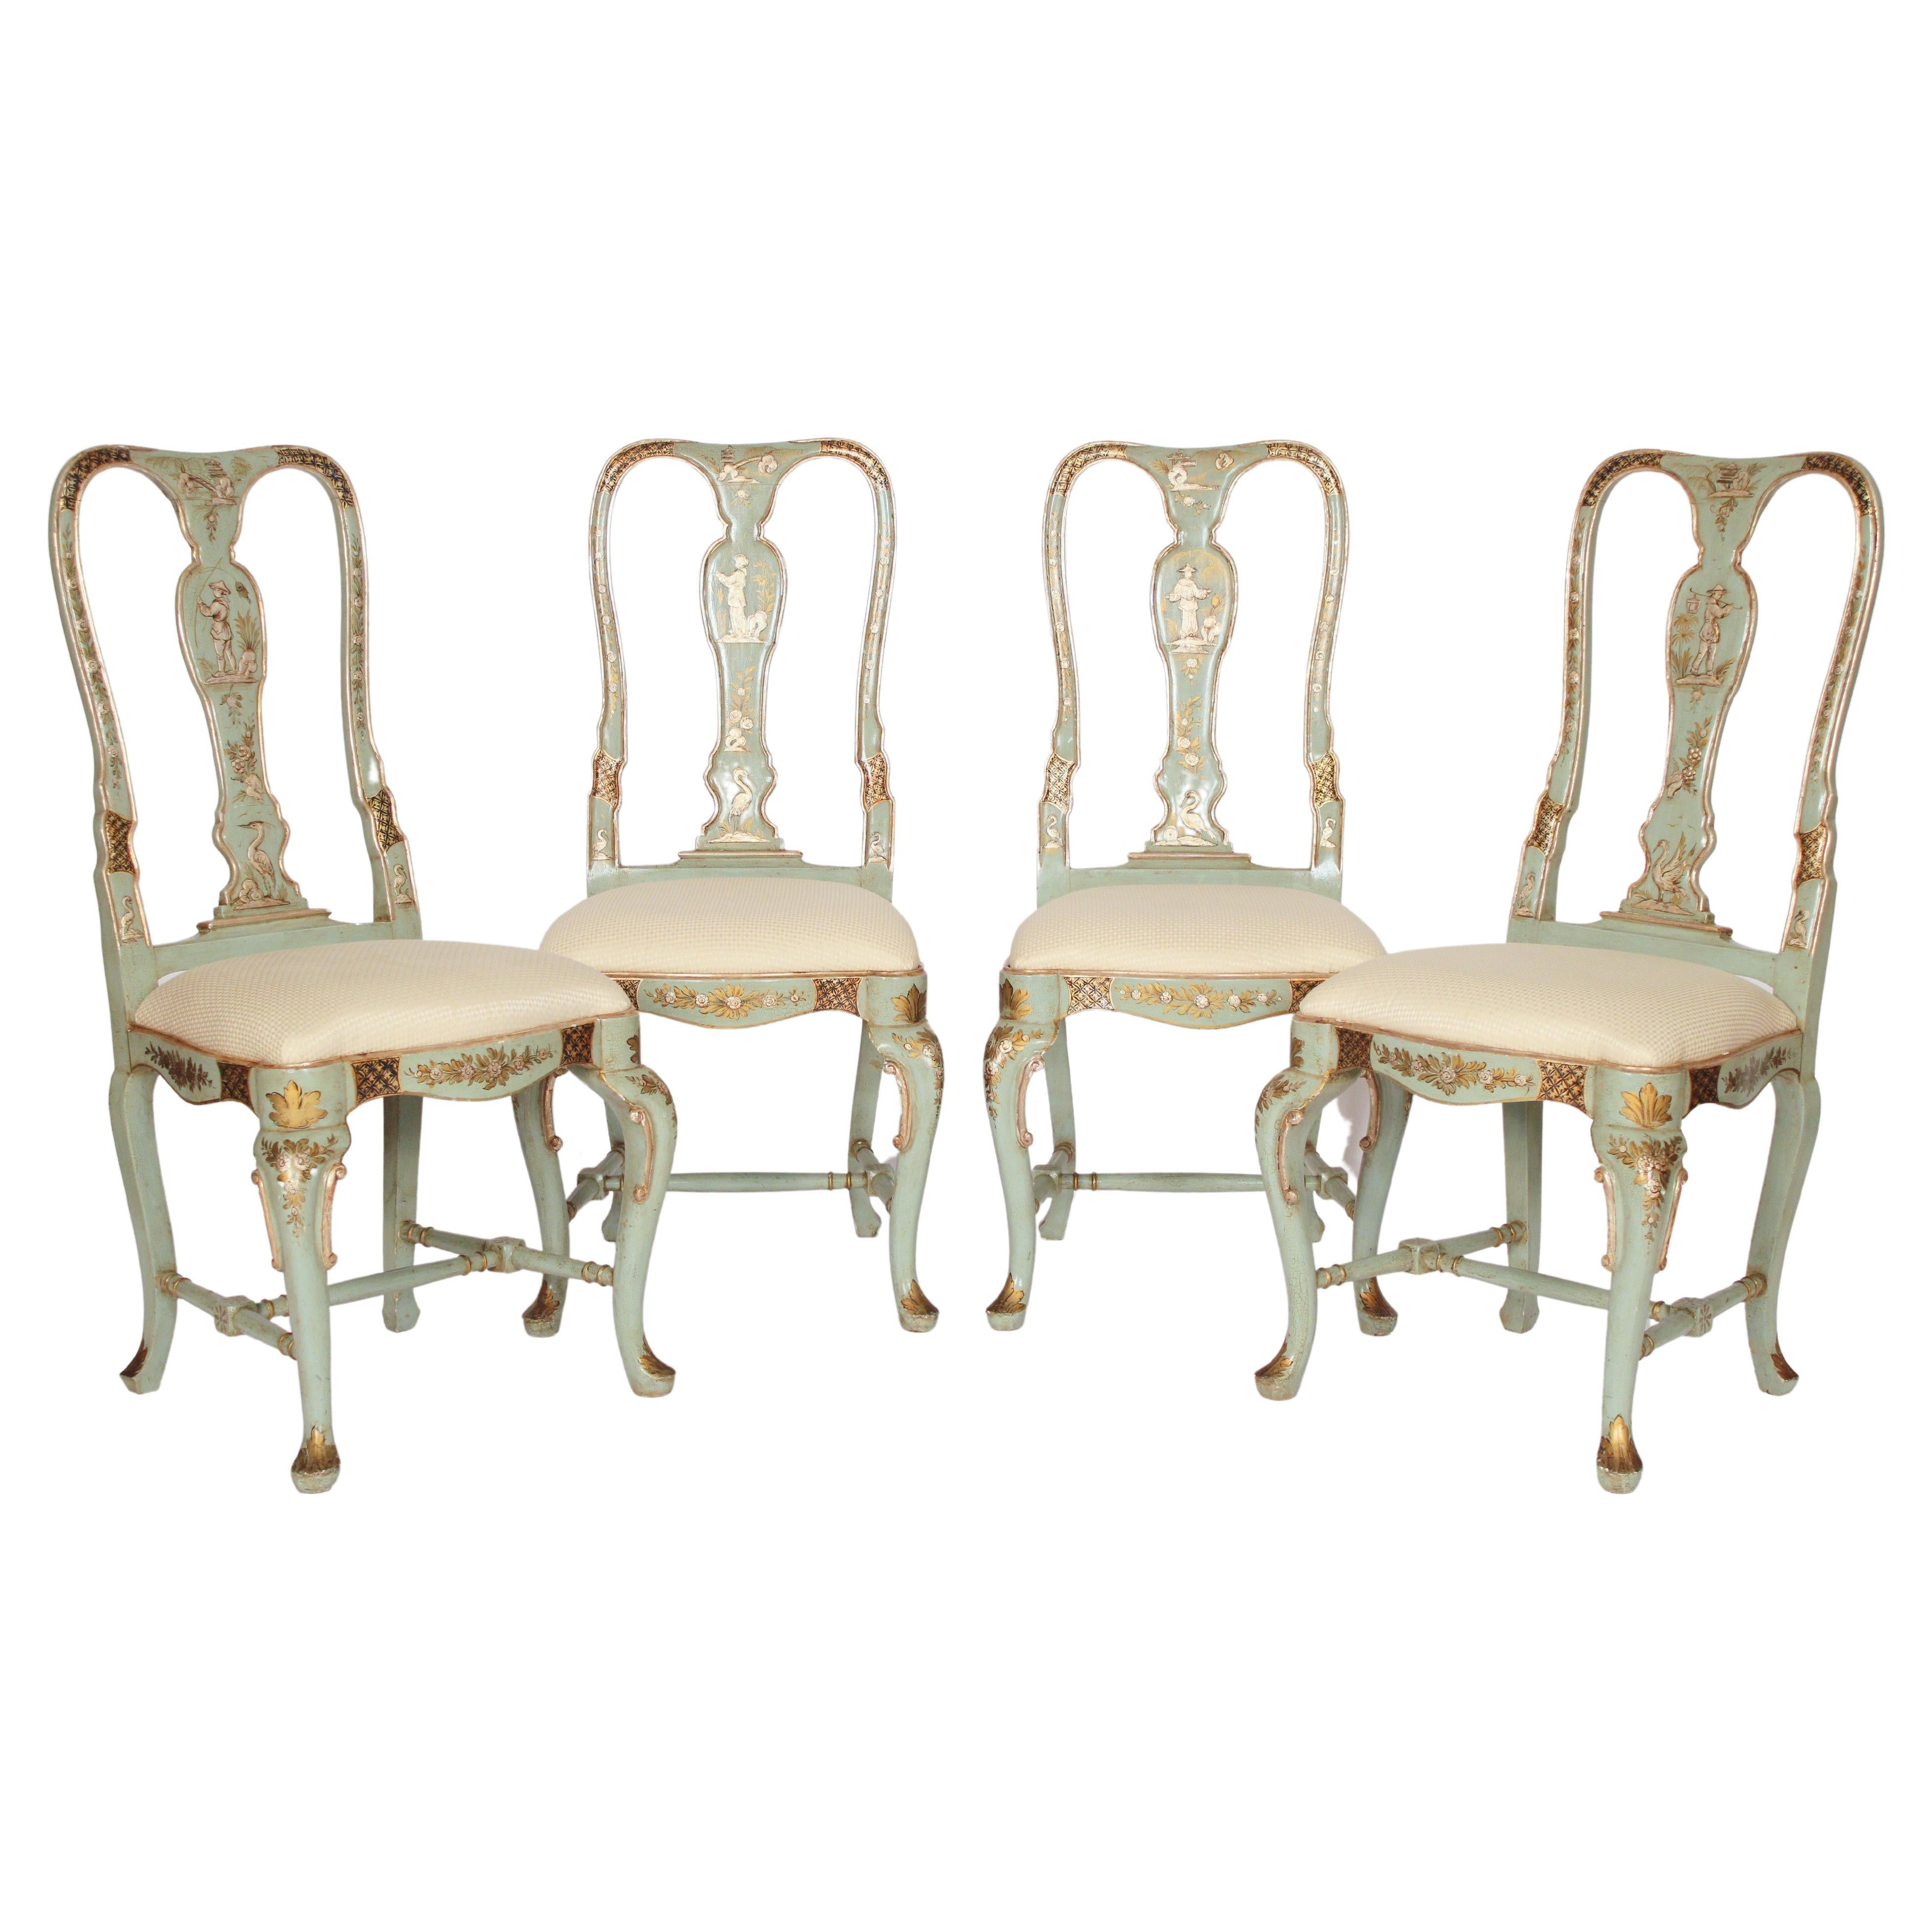 Set of 4 Queen Anne Style Chinoiserie Decorated Side Chairs